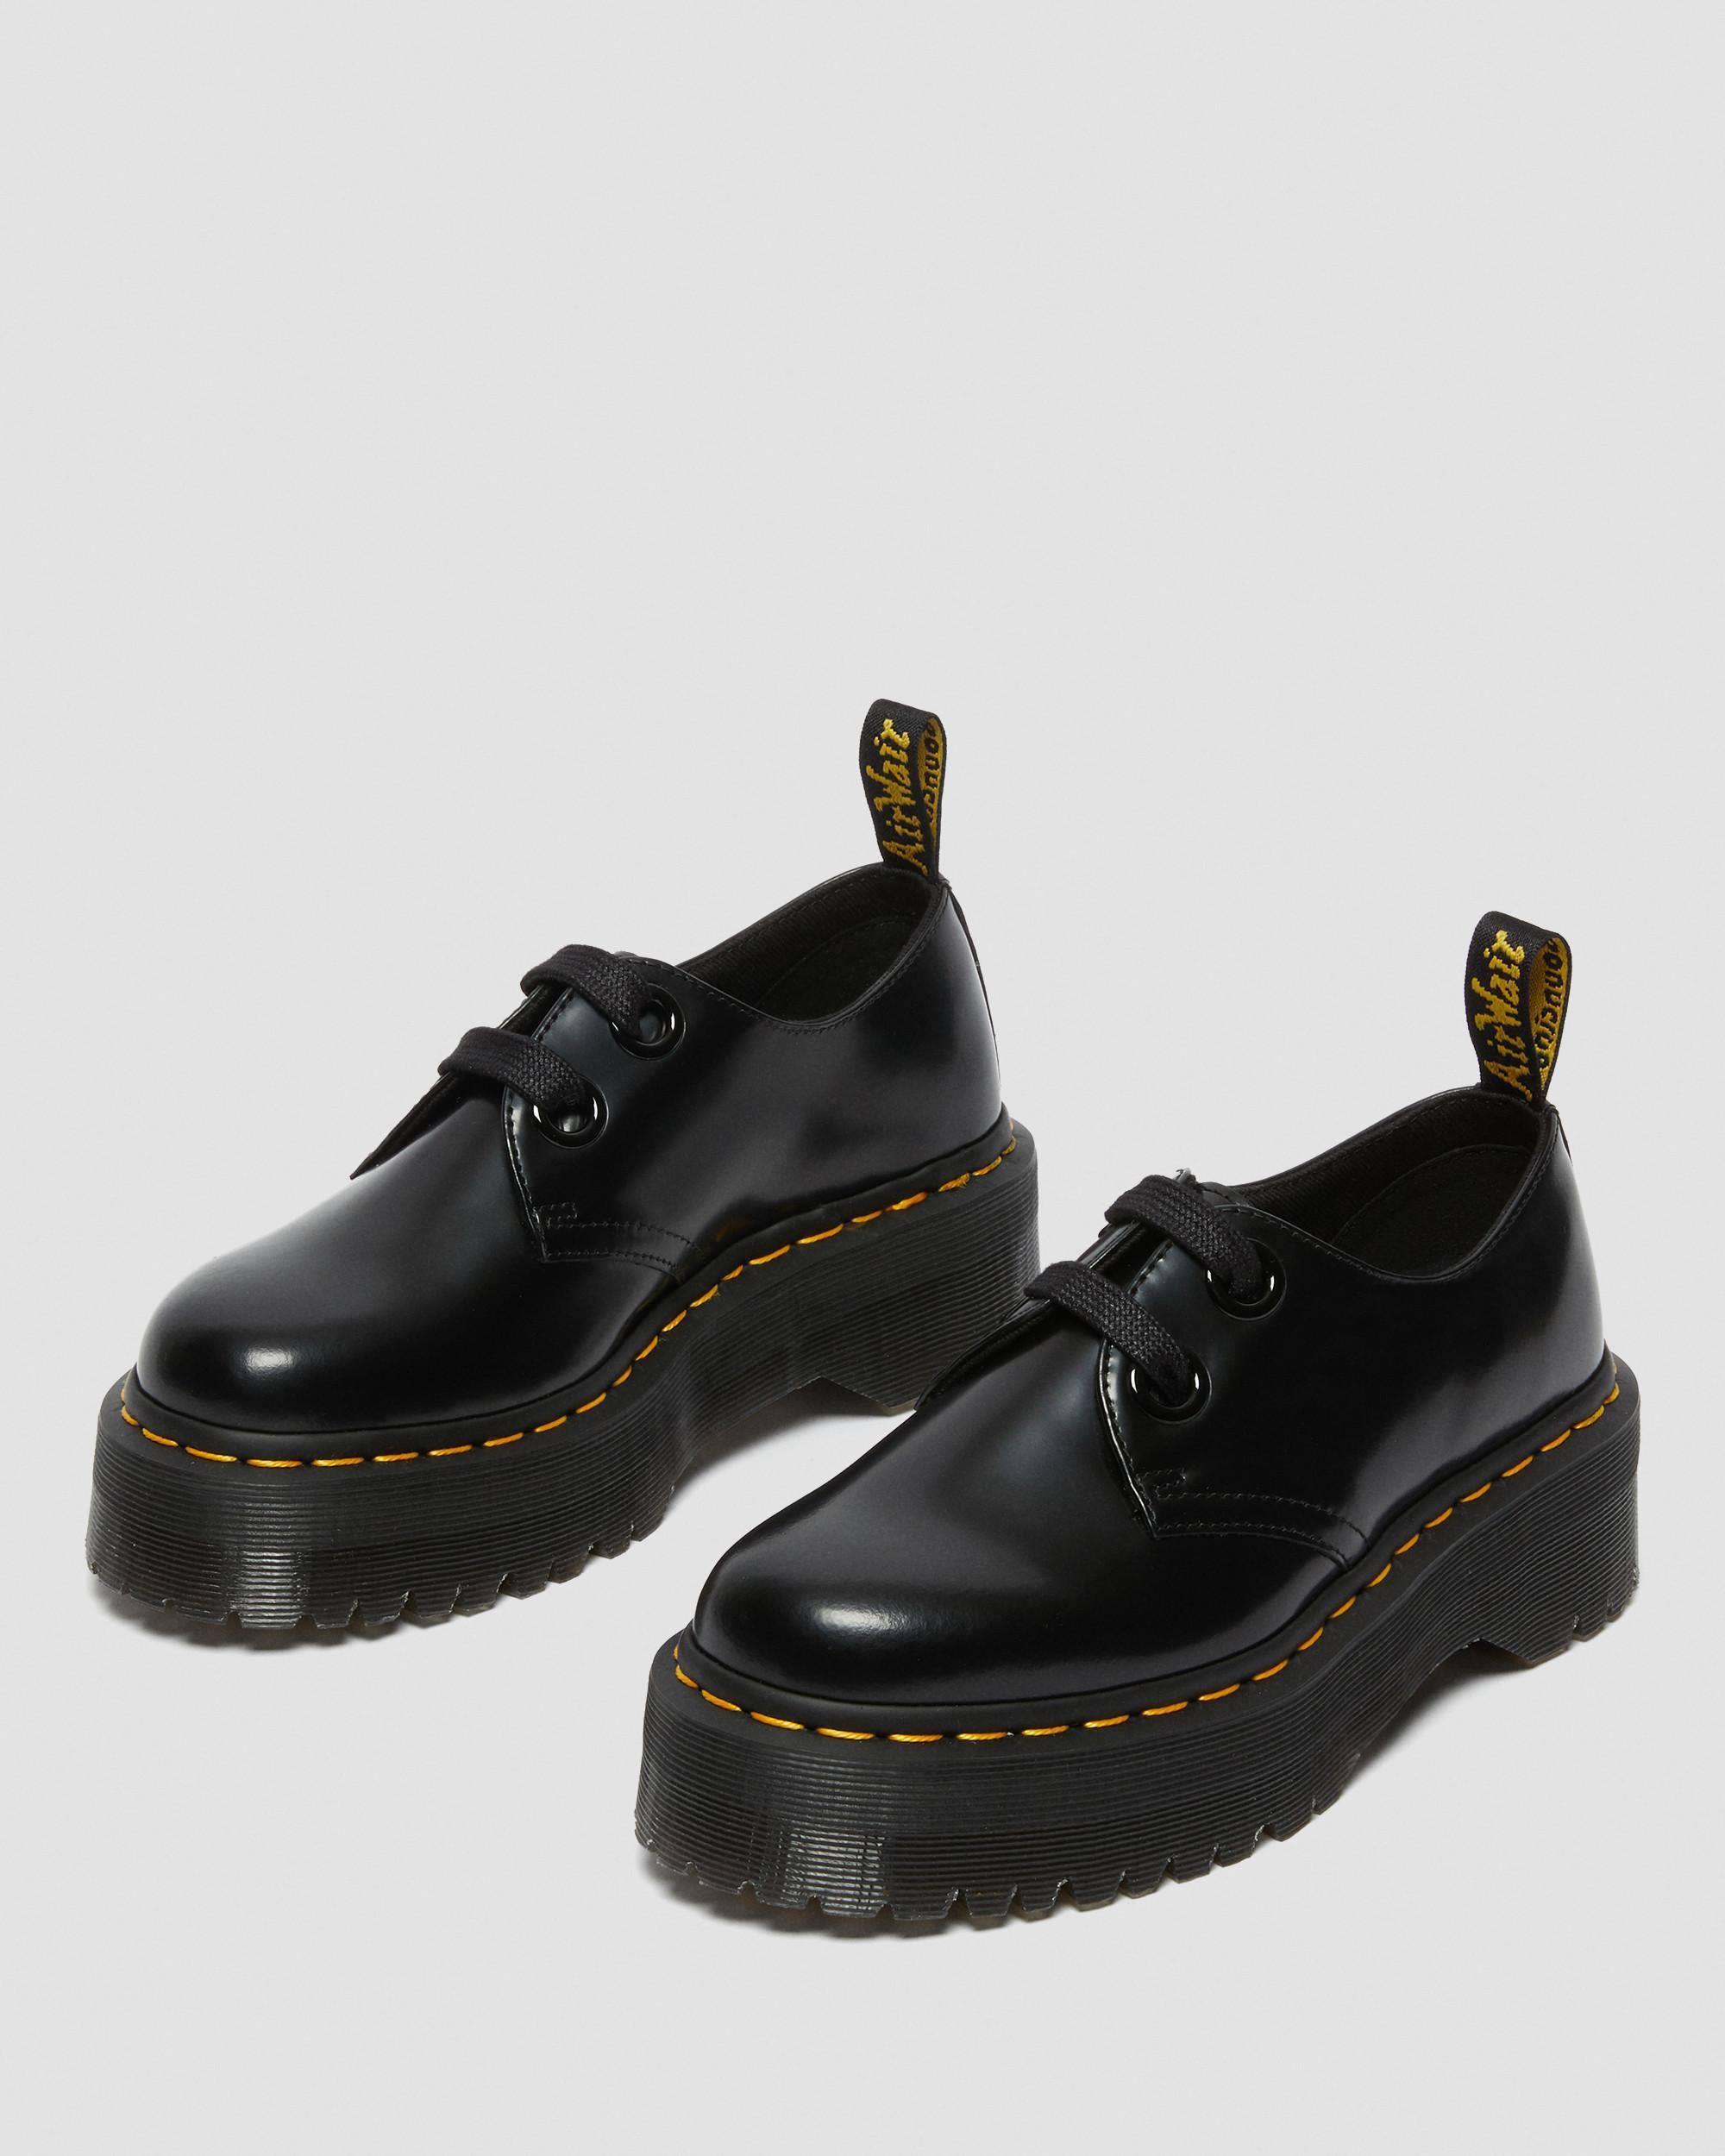 Dr. Martens Holly Women's Leather Platform Shoes in Black | Lyst